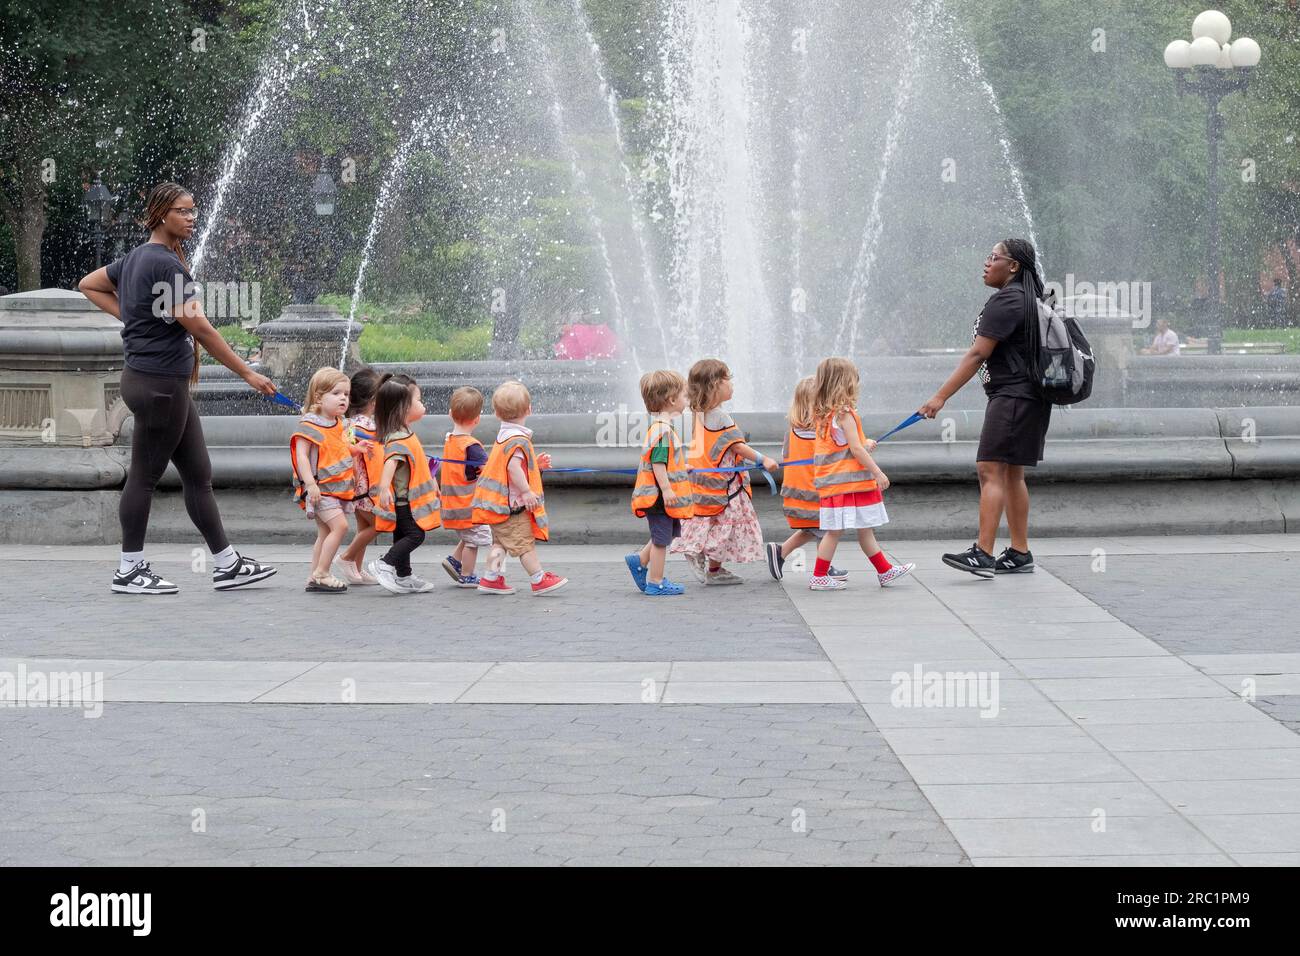 A daycare group wearing orange vests near the fountain in Washington Square Park in Manhattan, New York City. Stock Photo